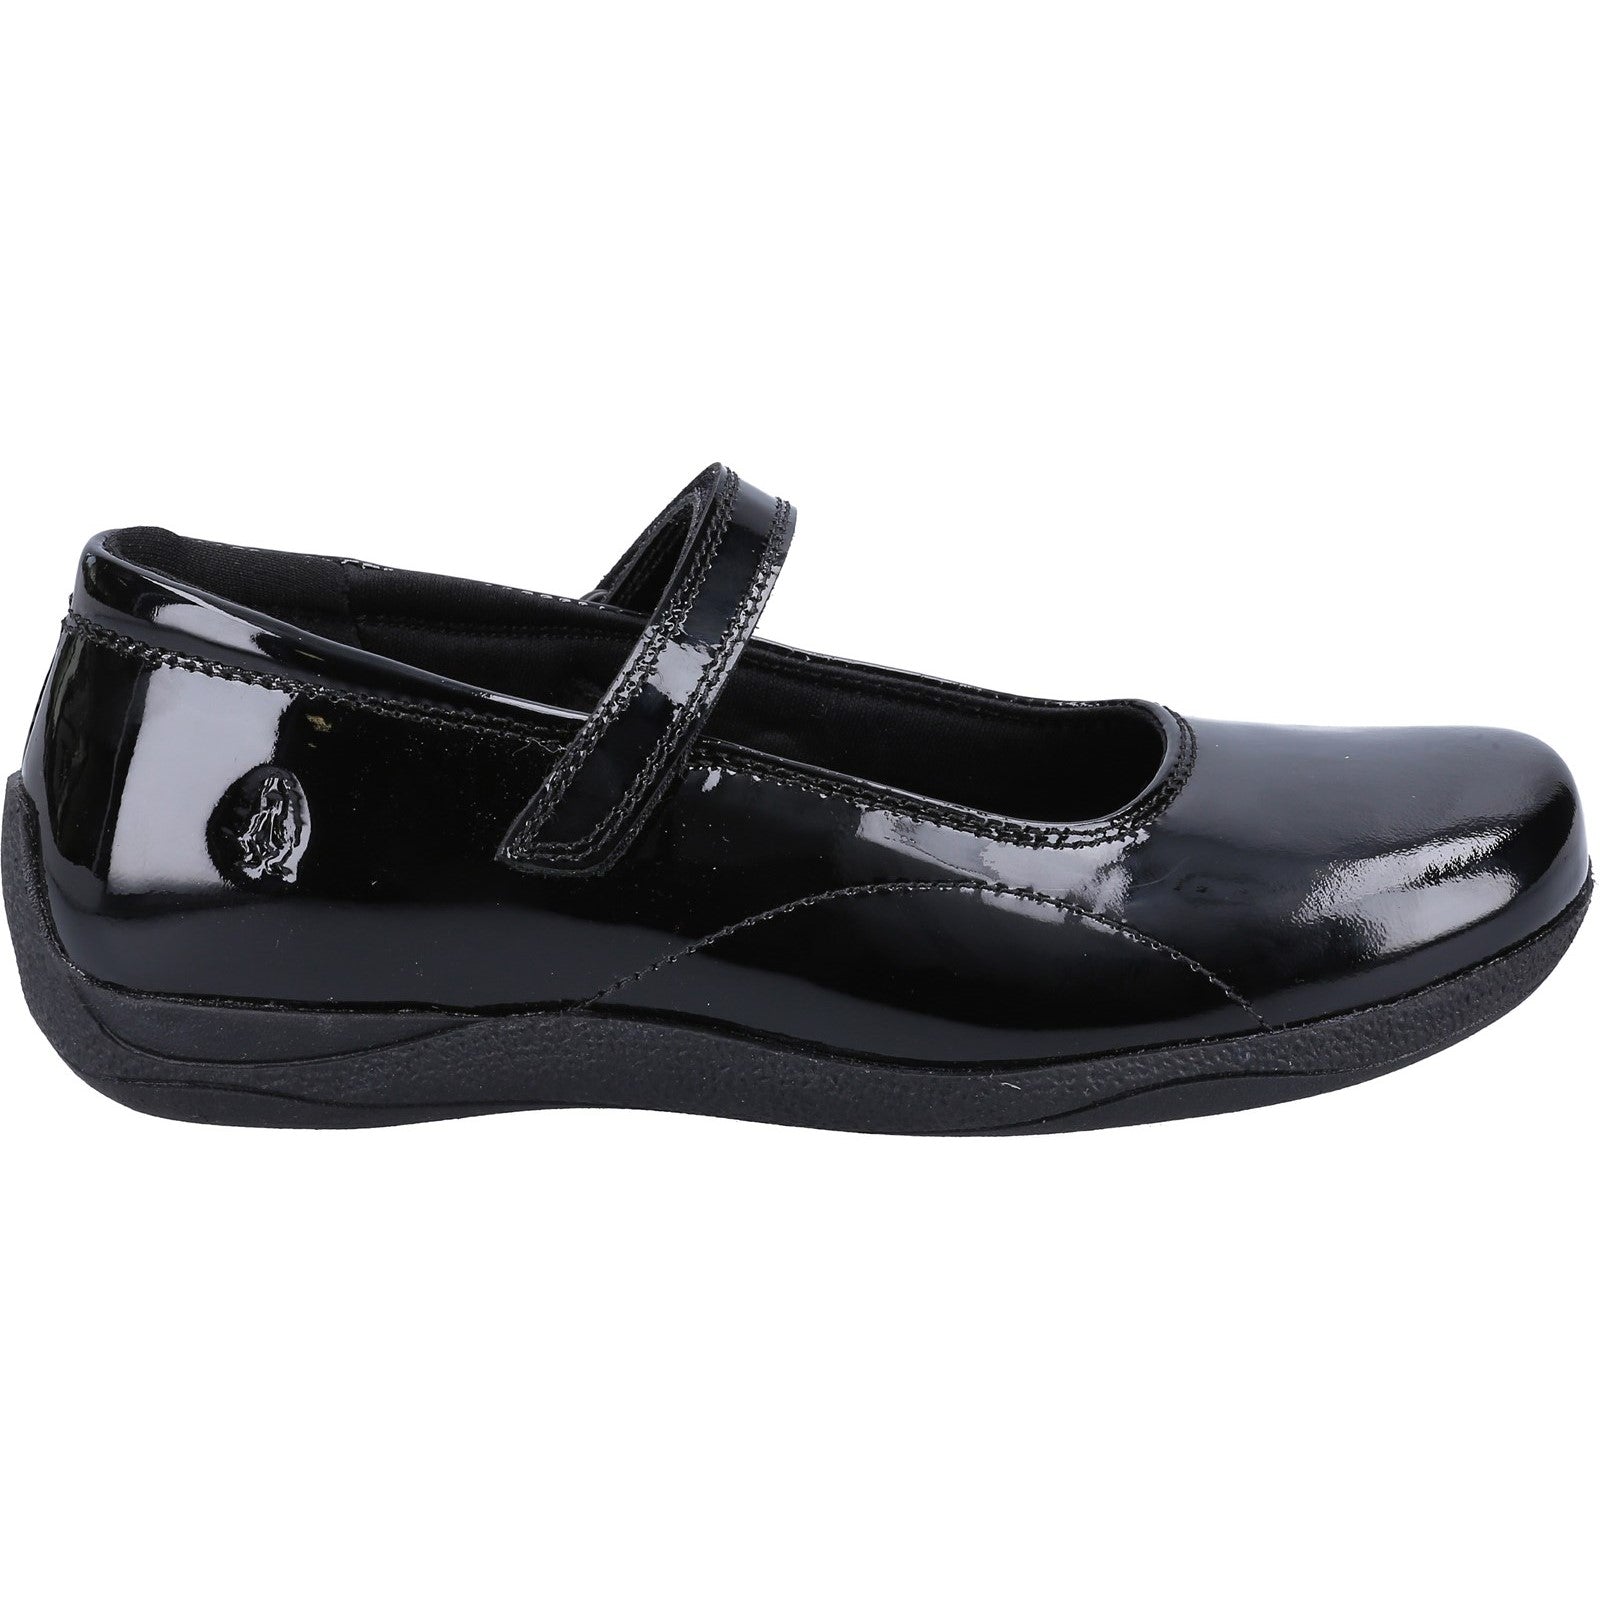 Hush Puppies Girls Aria Patent Leather School Shoes - Black